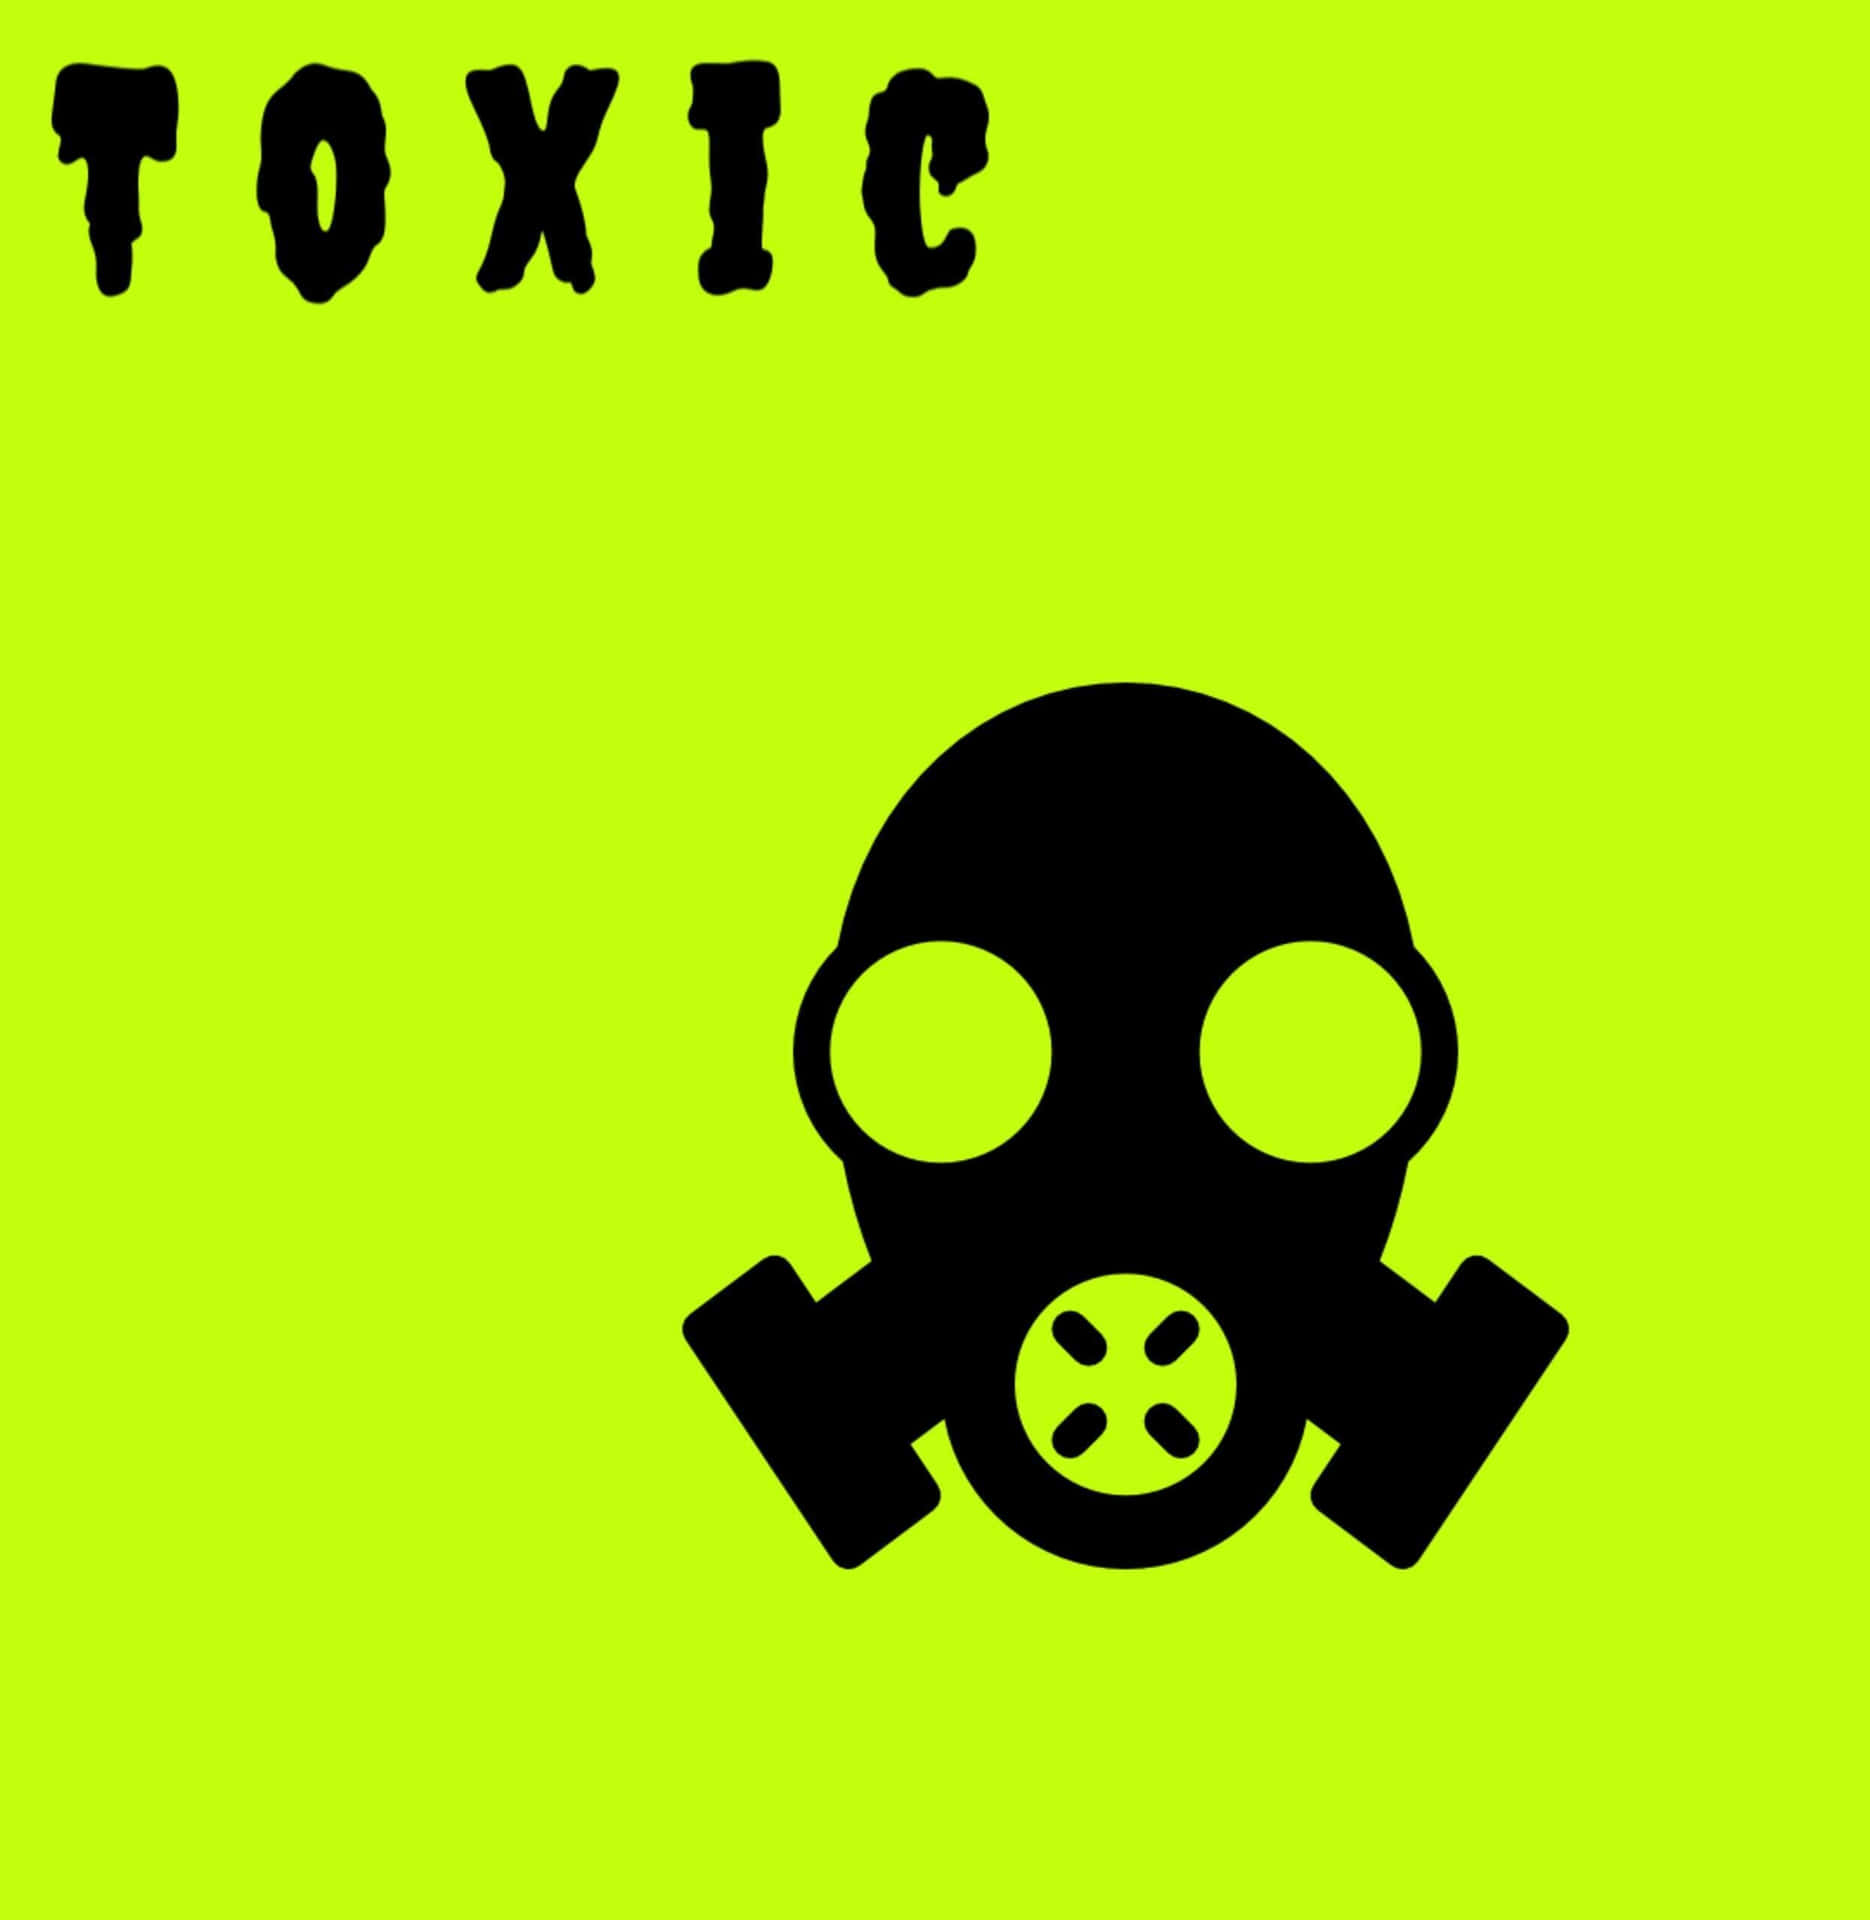 A Gas Mask With The Word Toxic On It Wallpaper